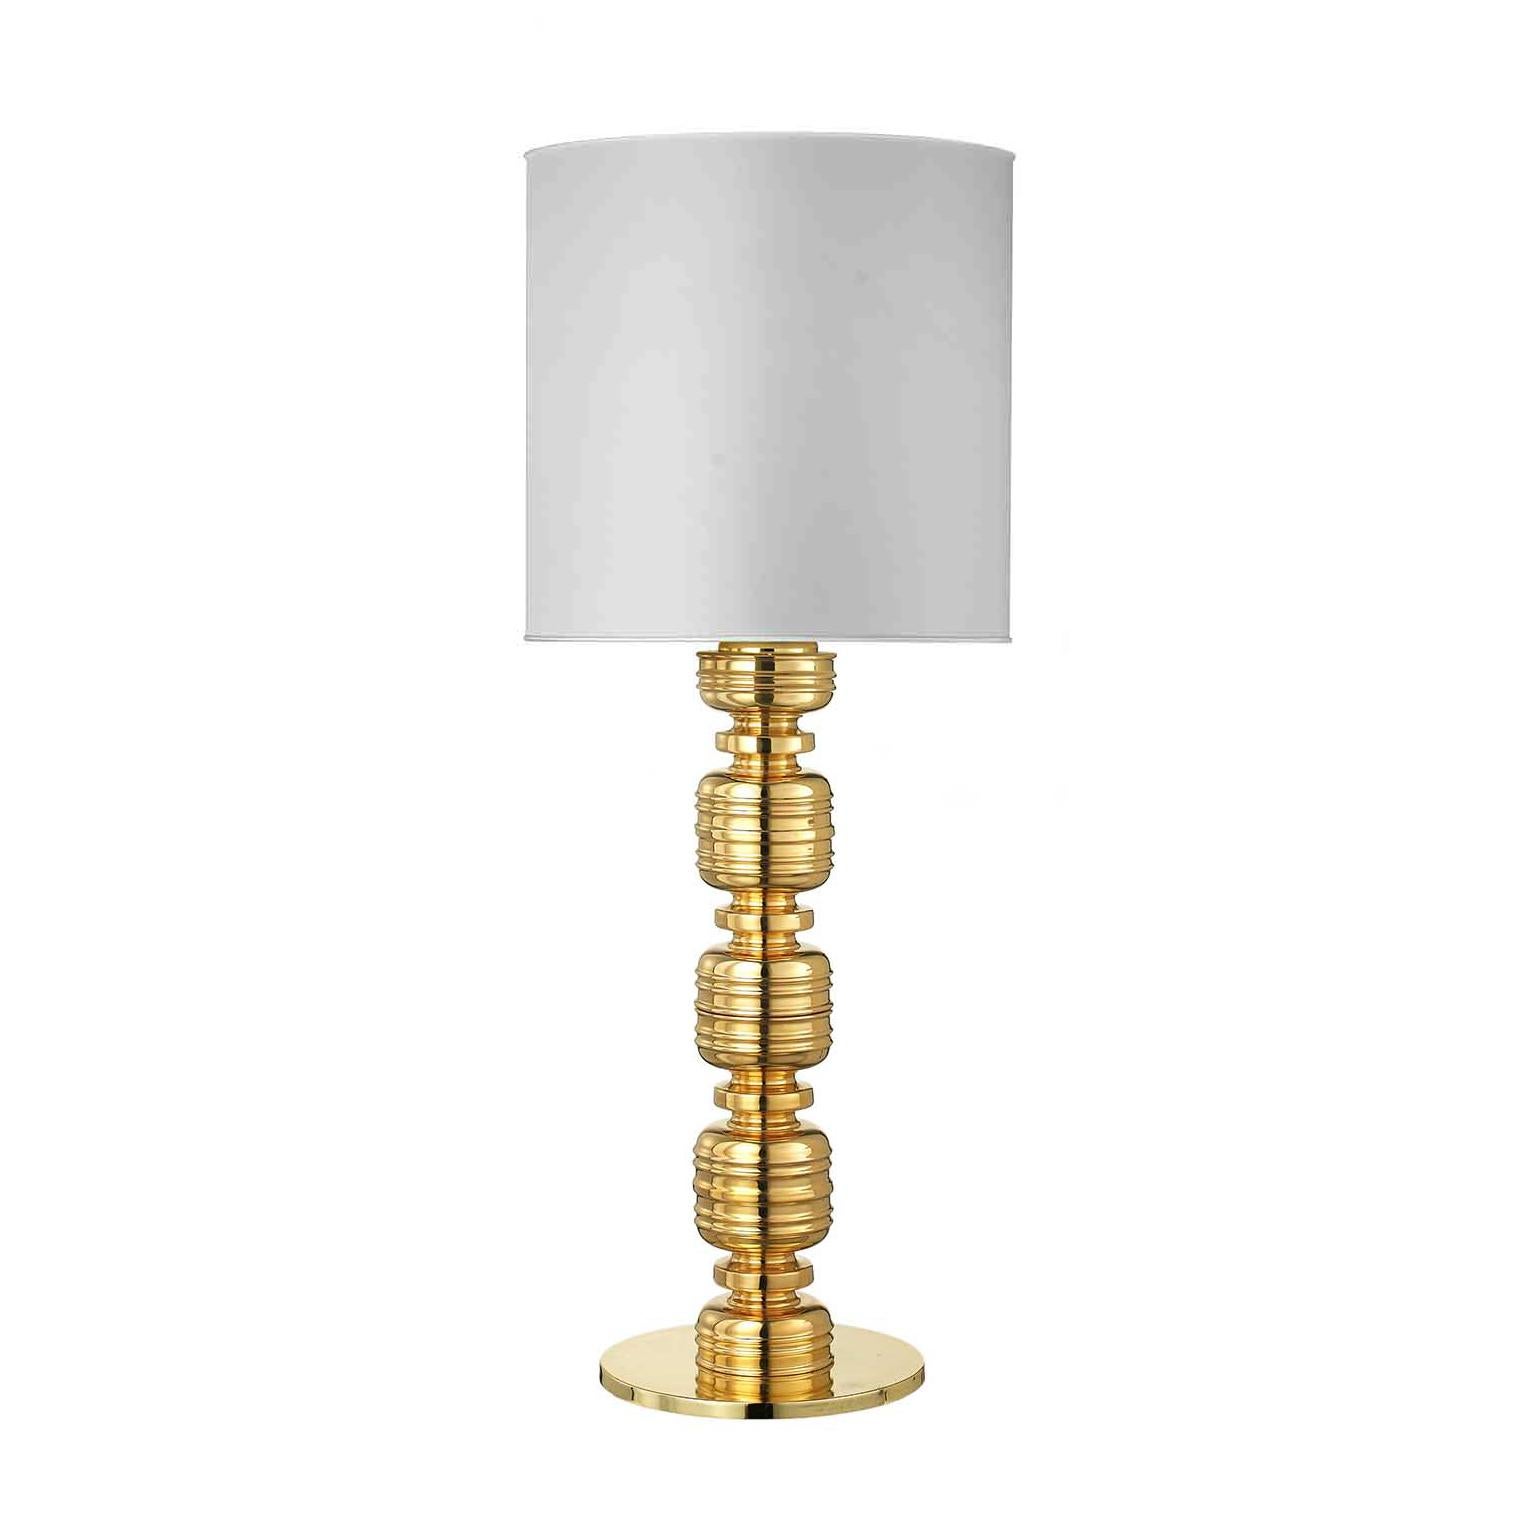 Ceramic lamp, handcrafted in 24-karat gold with cotton lampshade

THEA 2, code LTH130, measures: Height 130.0 cm., diameter 40.0 cm.

  